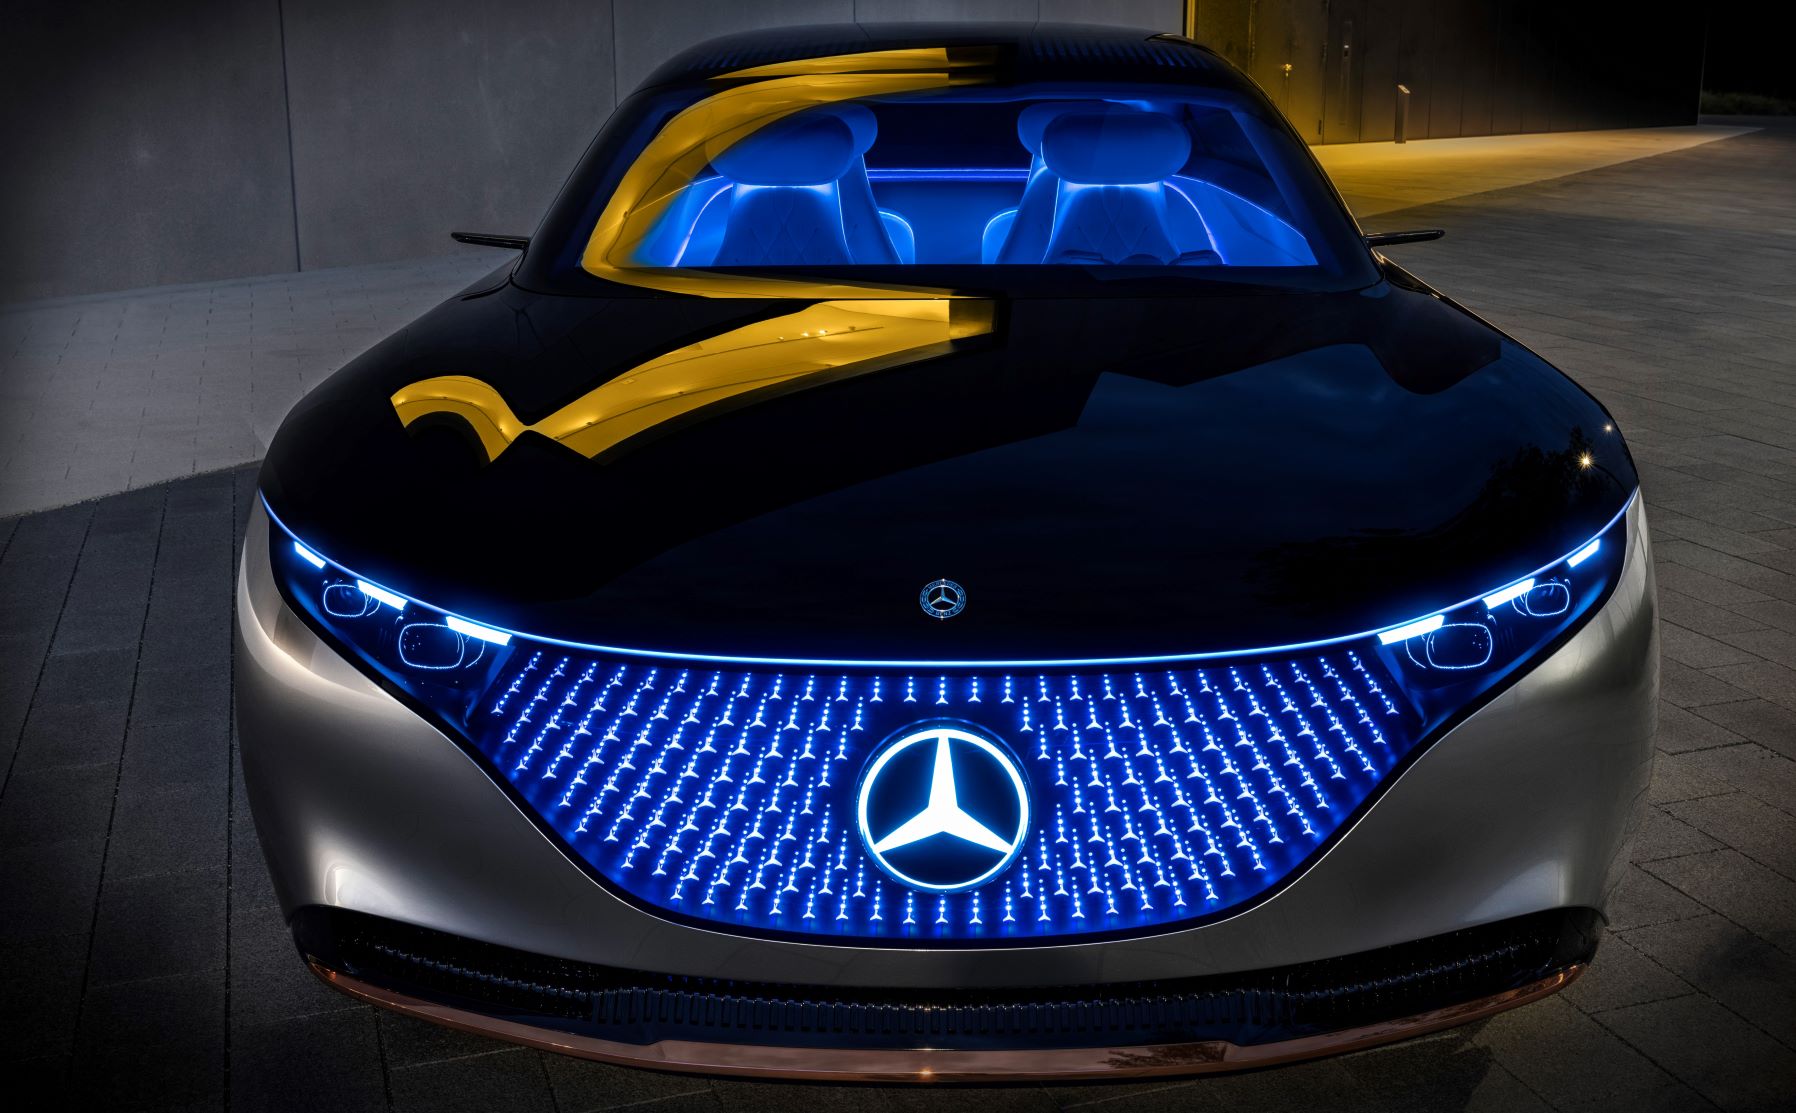 Mercedes-Benz sets out long-term ambitions as the world's most